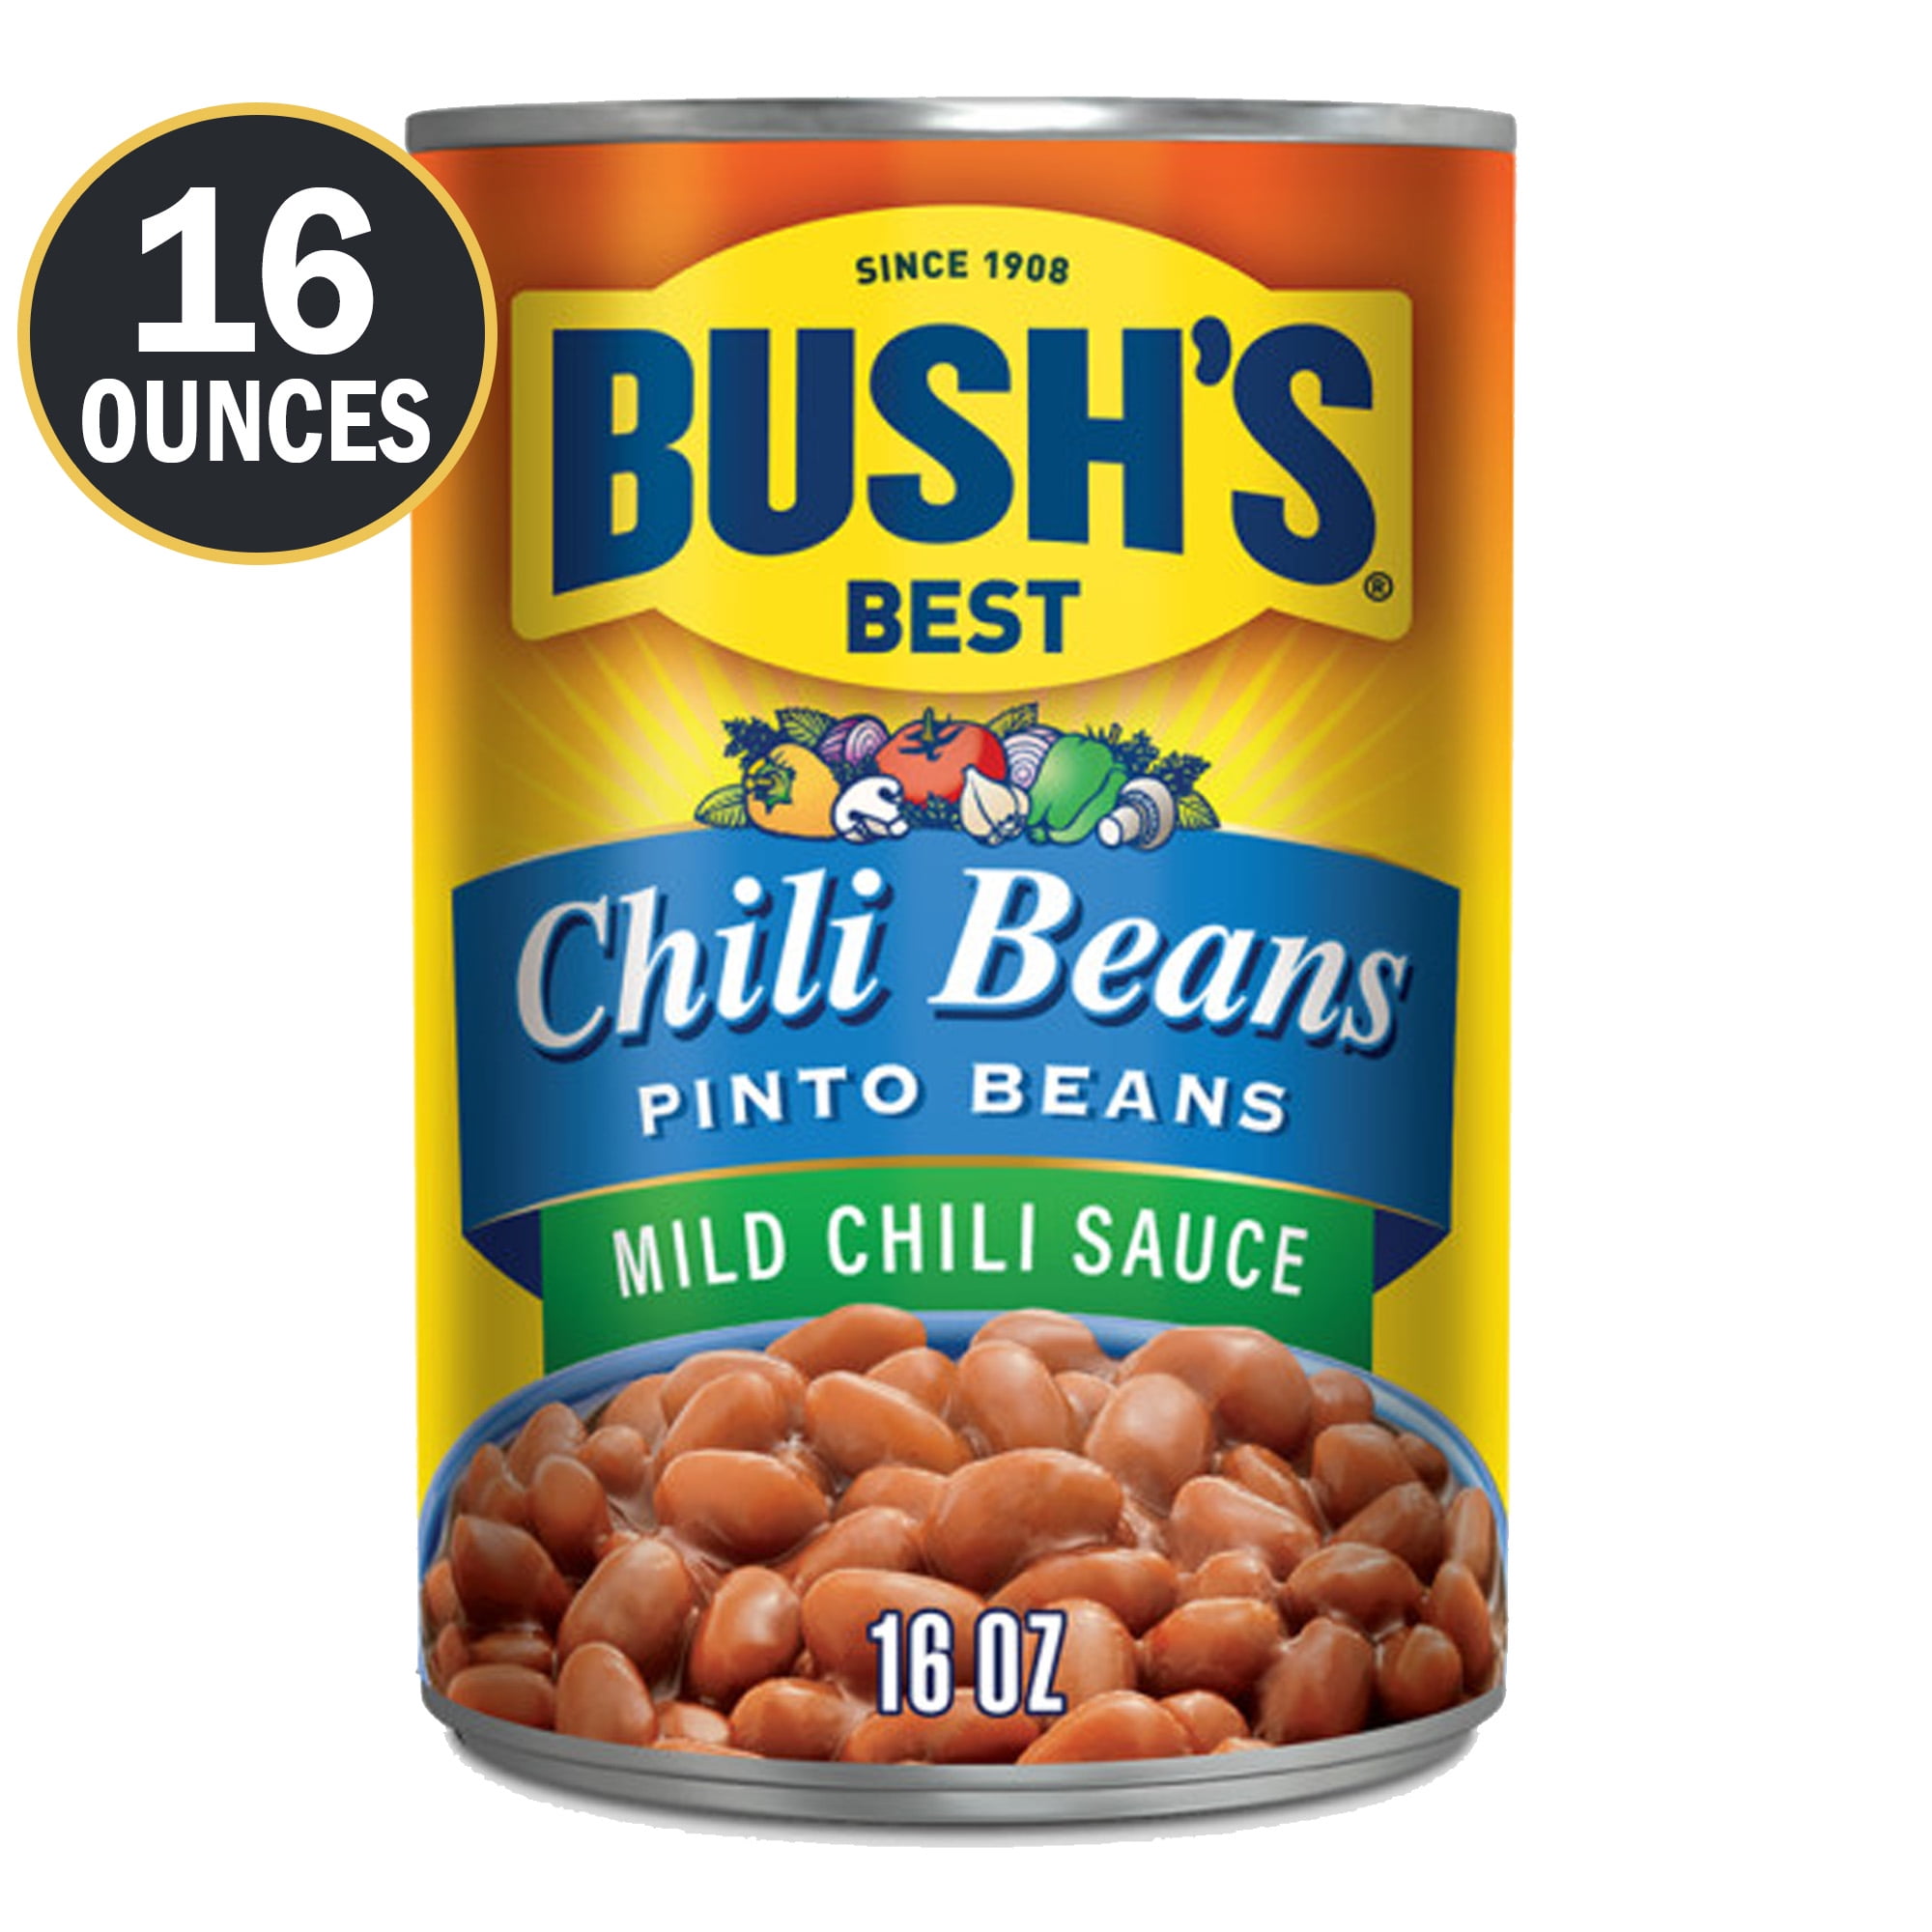 BUSH'S Chili Beans, Pinto Beans in Mild Chili Sauce Canned Beans, 16 oz